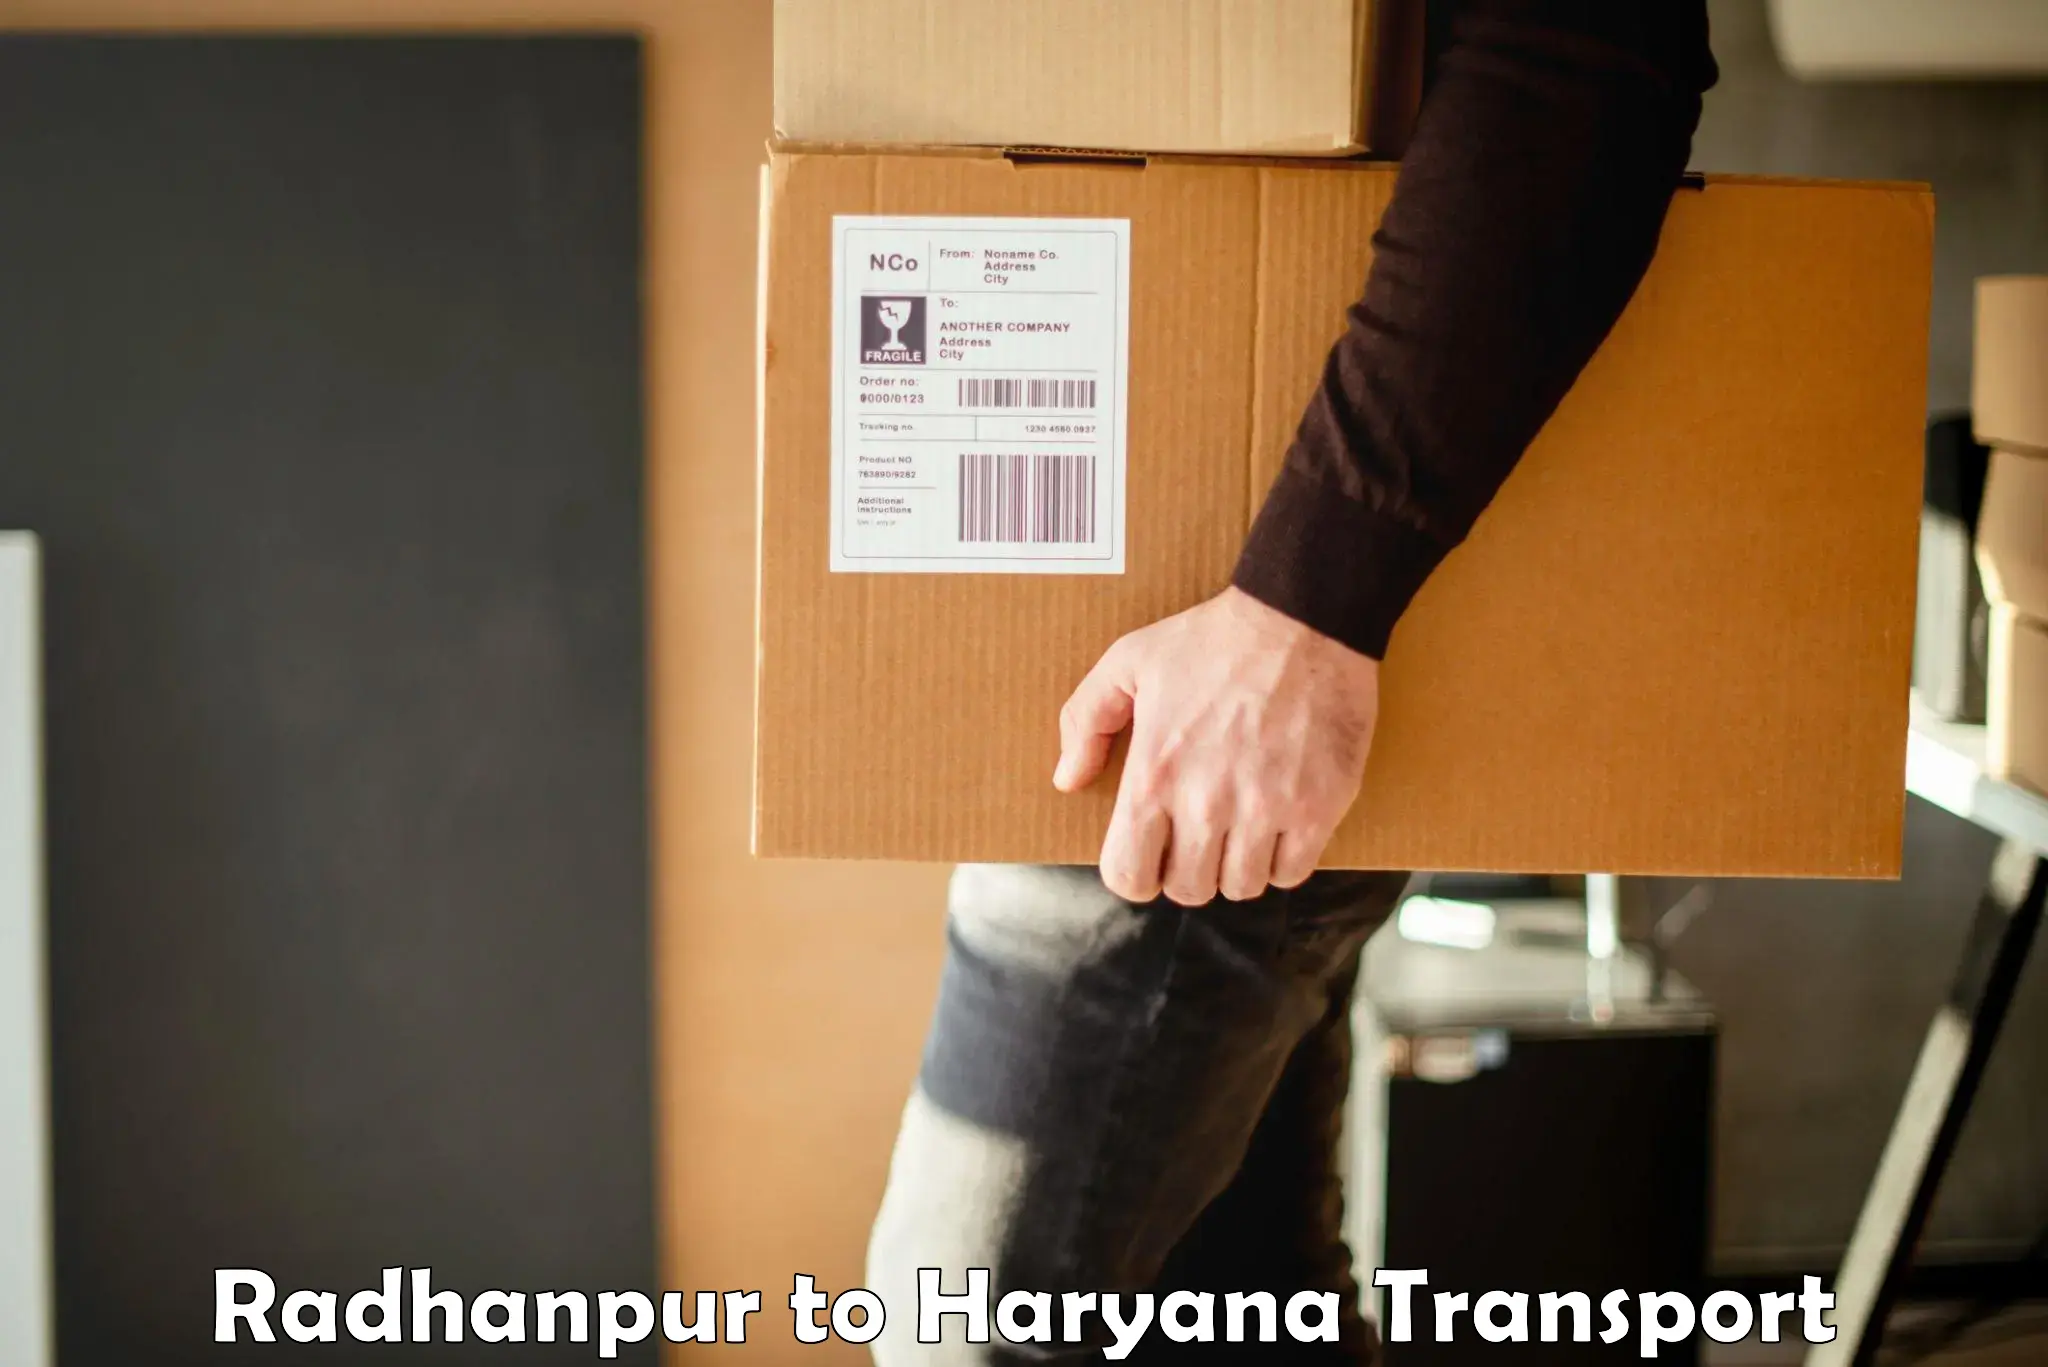 Road transport online services Radhanpur to NCR Haryana